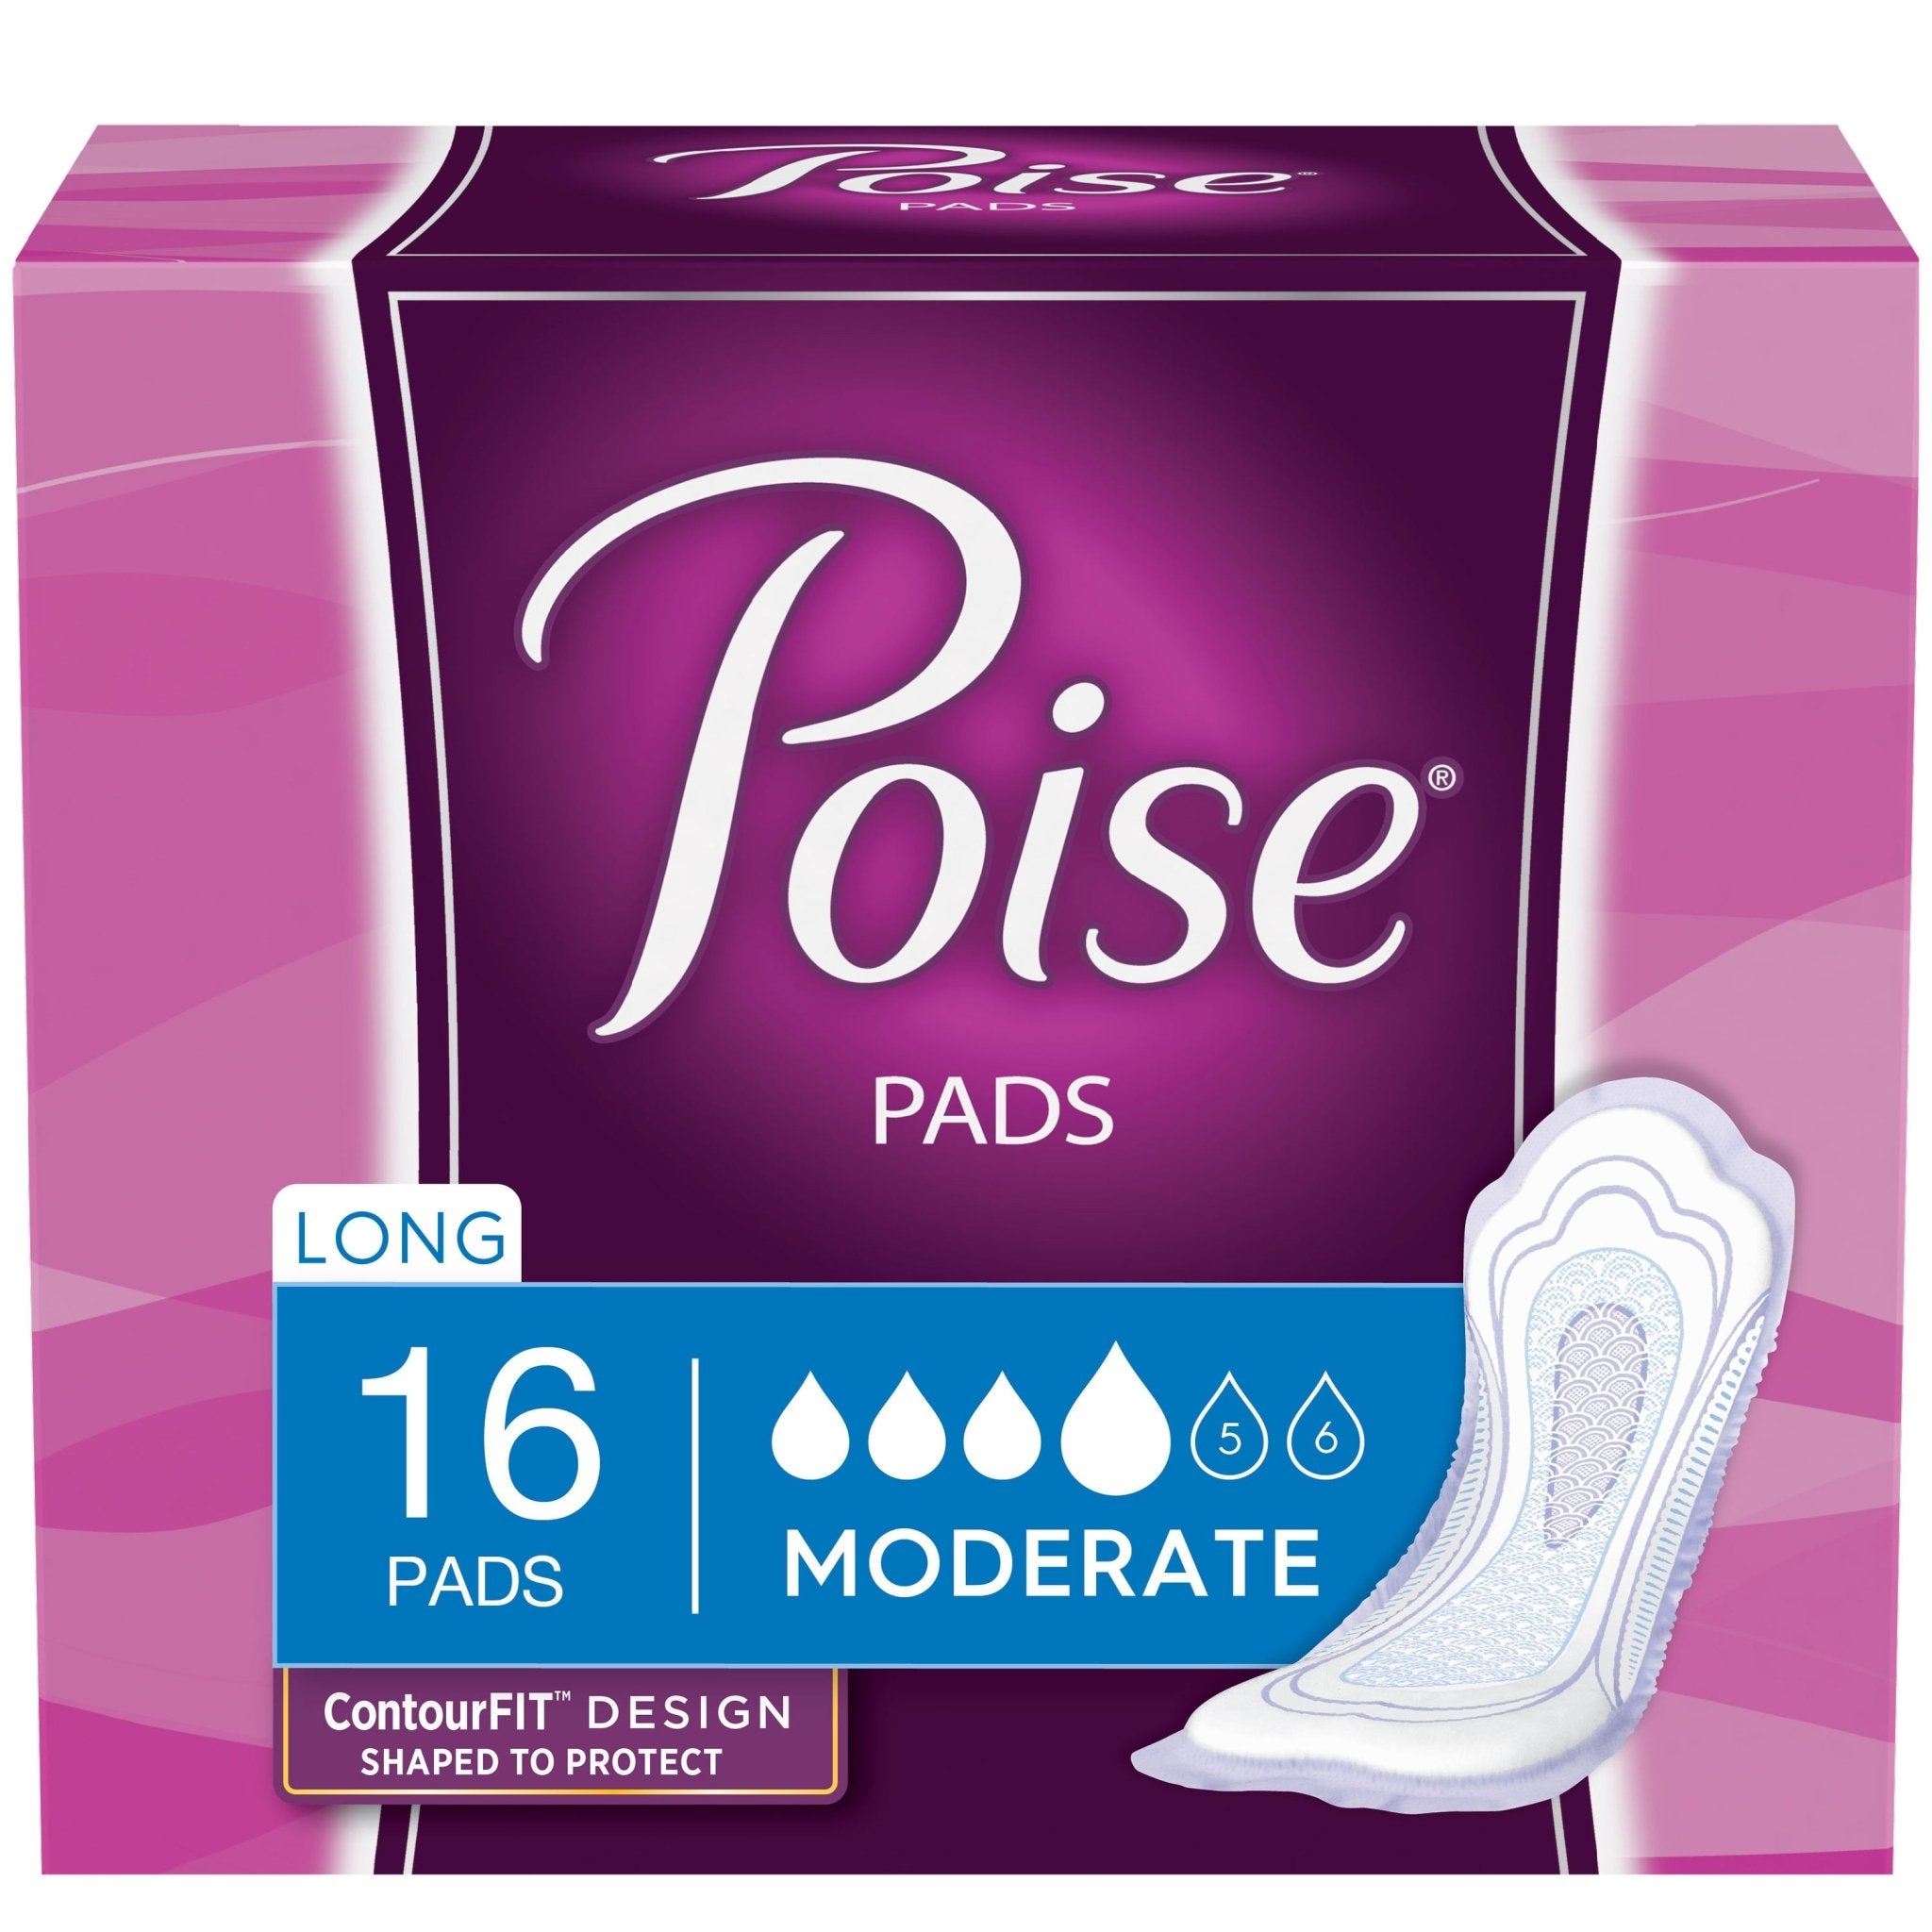 CA/96 - Poise Incontinence Pads, Moderate Absorbency, Long, 16 Count (4 Cases) - Best Buy Medical Supplies